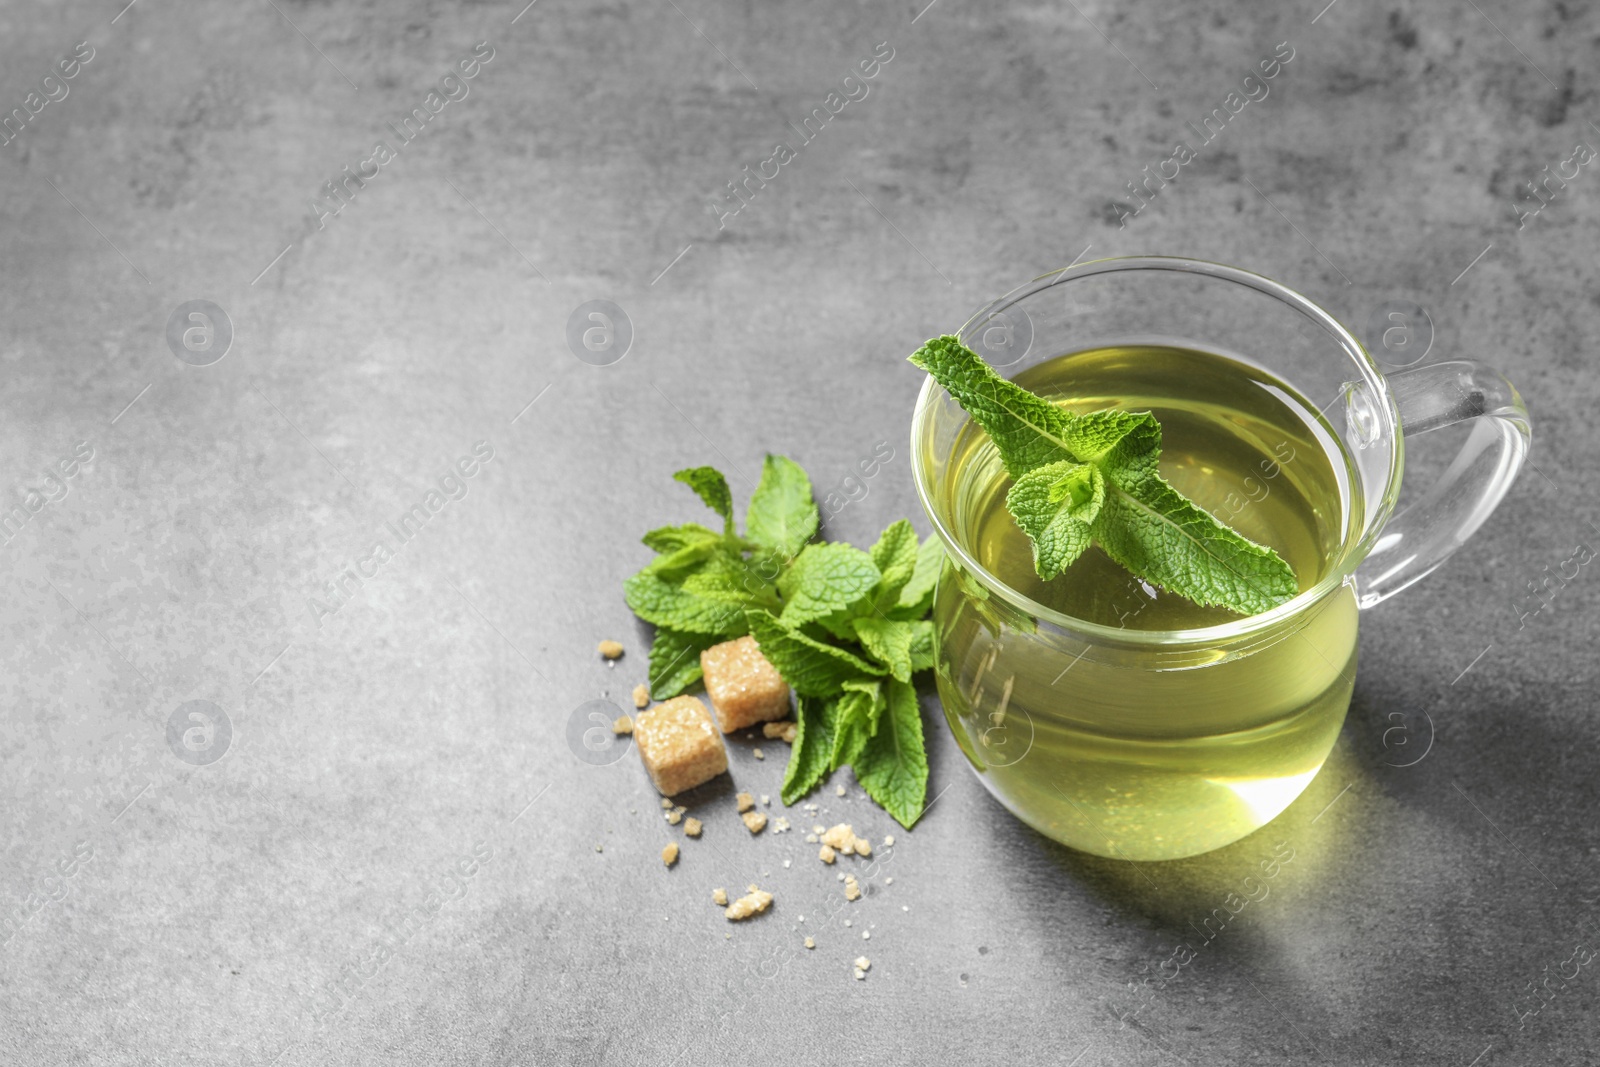 Photo of Cup with hot aromatic mint tea, fresh leaves and sugar cubes on table